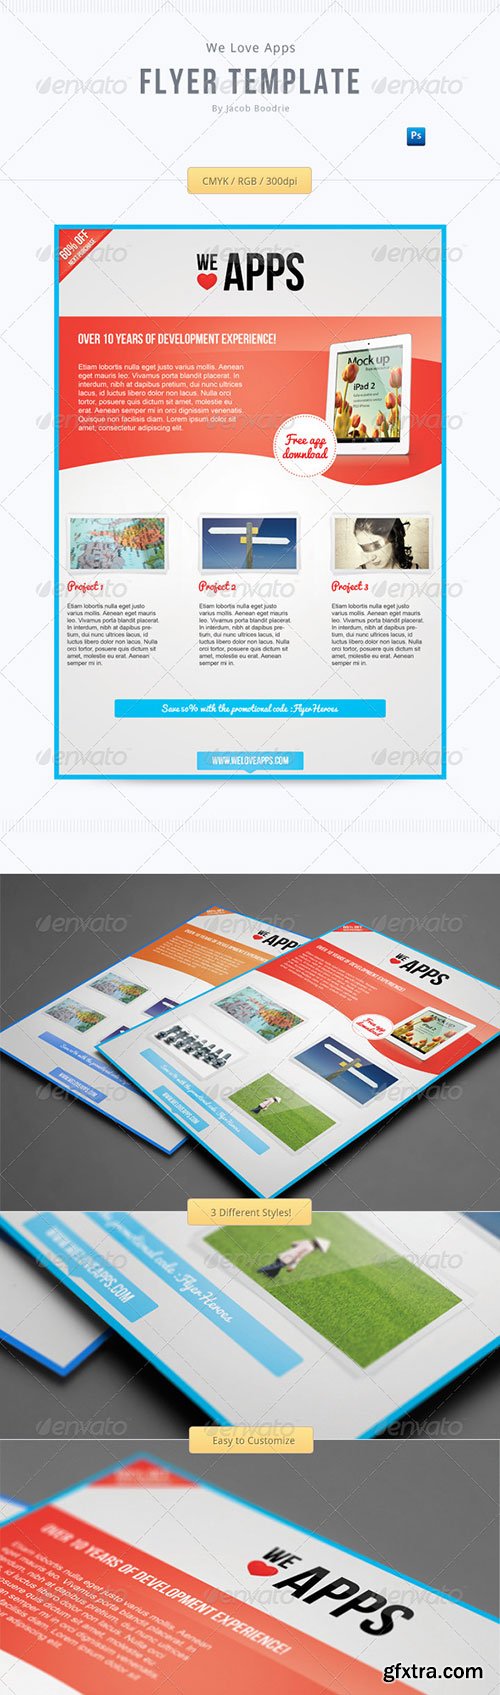 GraphicRiver - We Love Apps Flyer Template